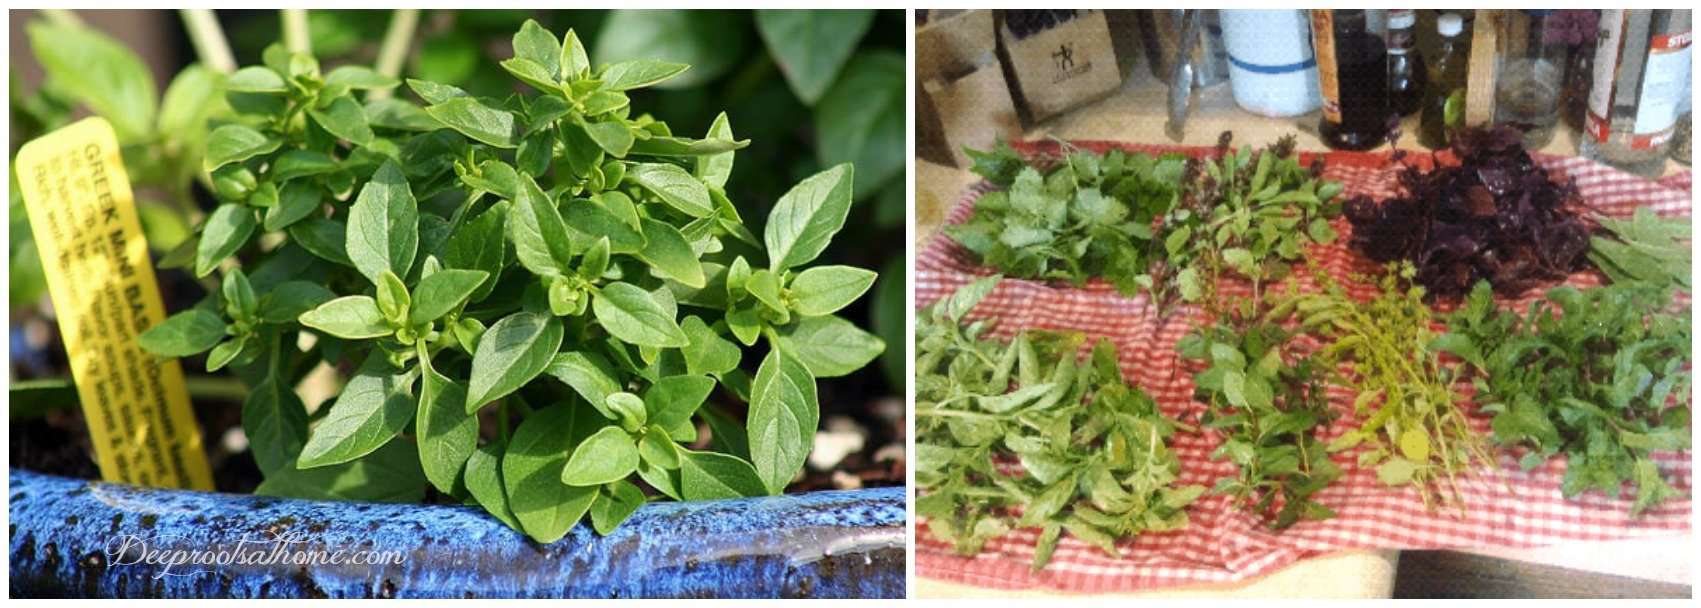 Root Basil Starts From Stem Cuttings Right In Your Window. Greek basil